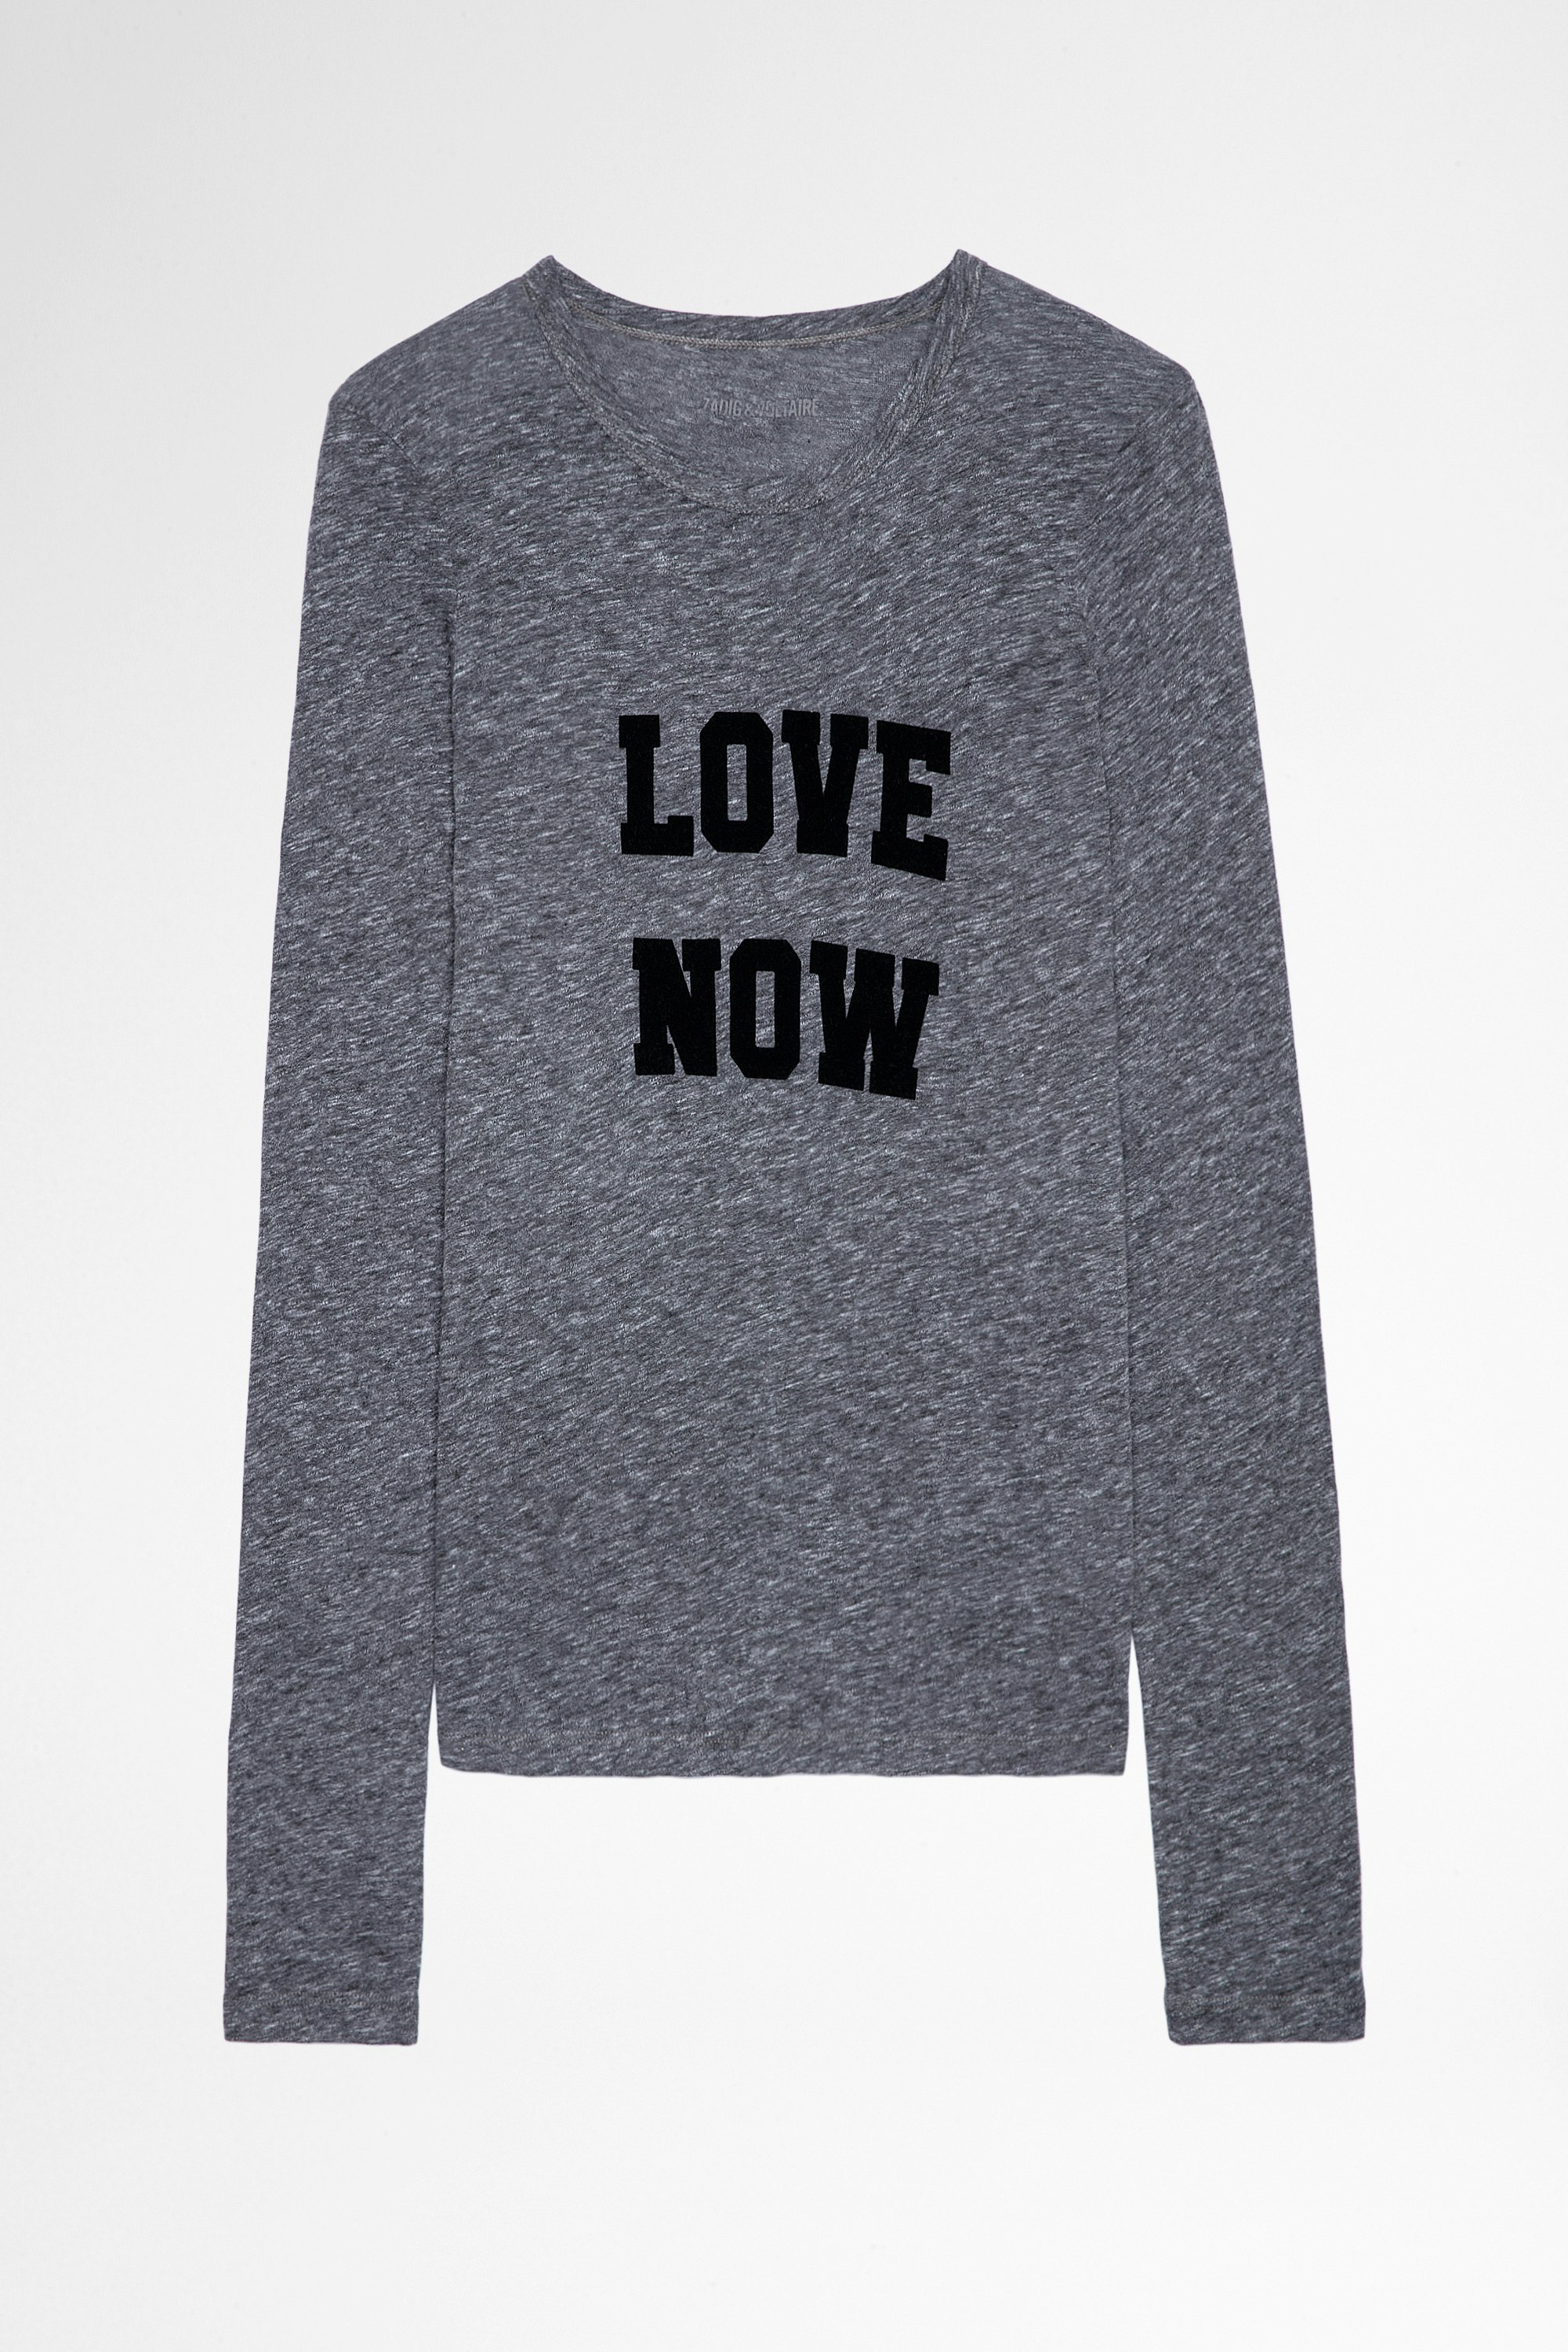 Willy Ｔシャツ Women's Love Now gray long-sleeved t-shirt